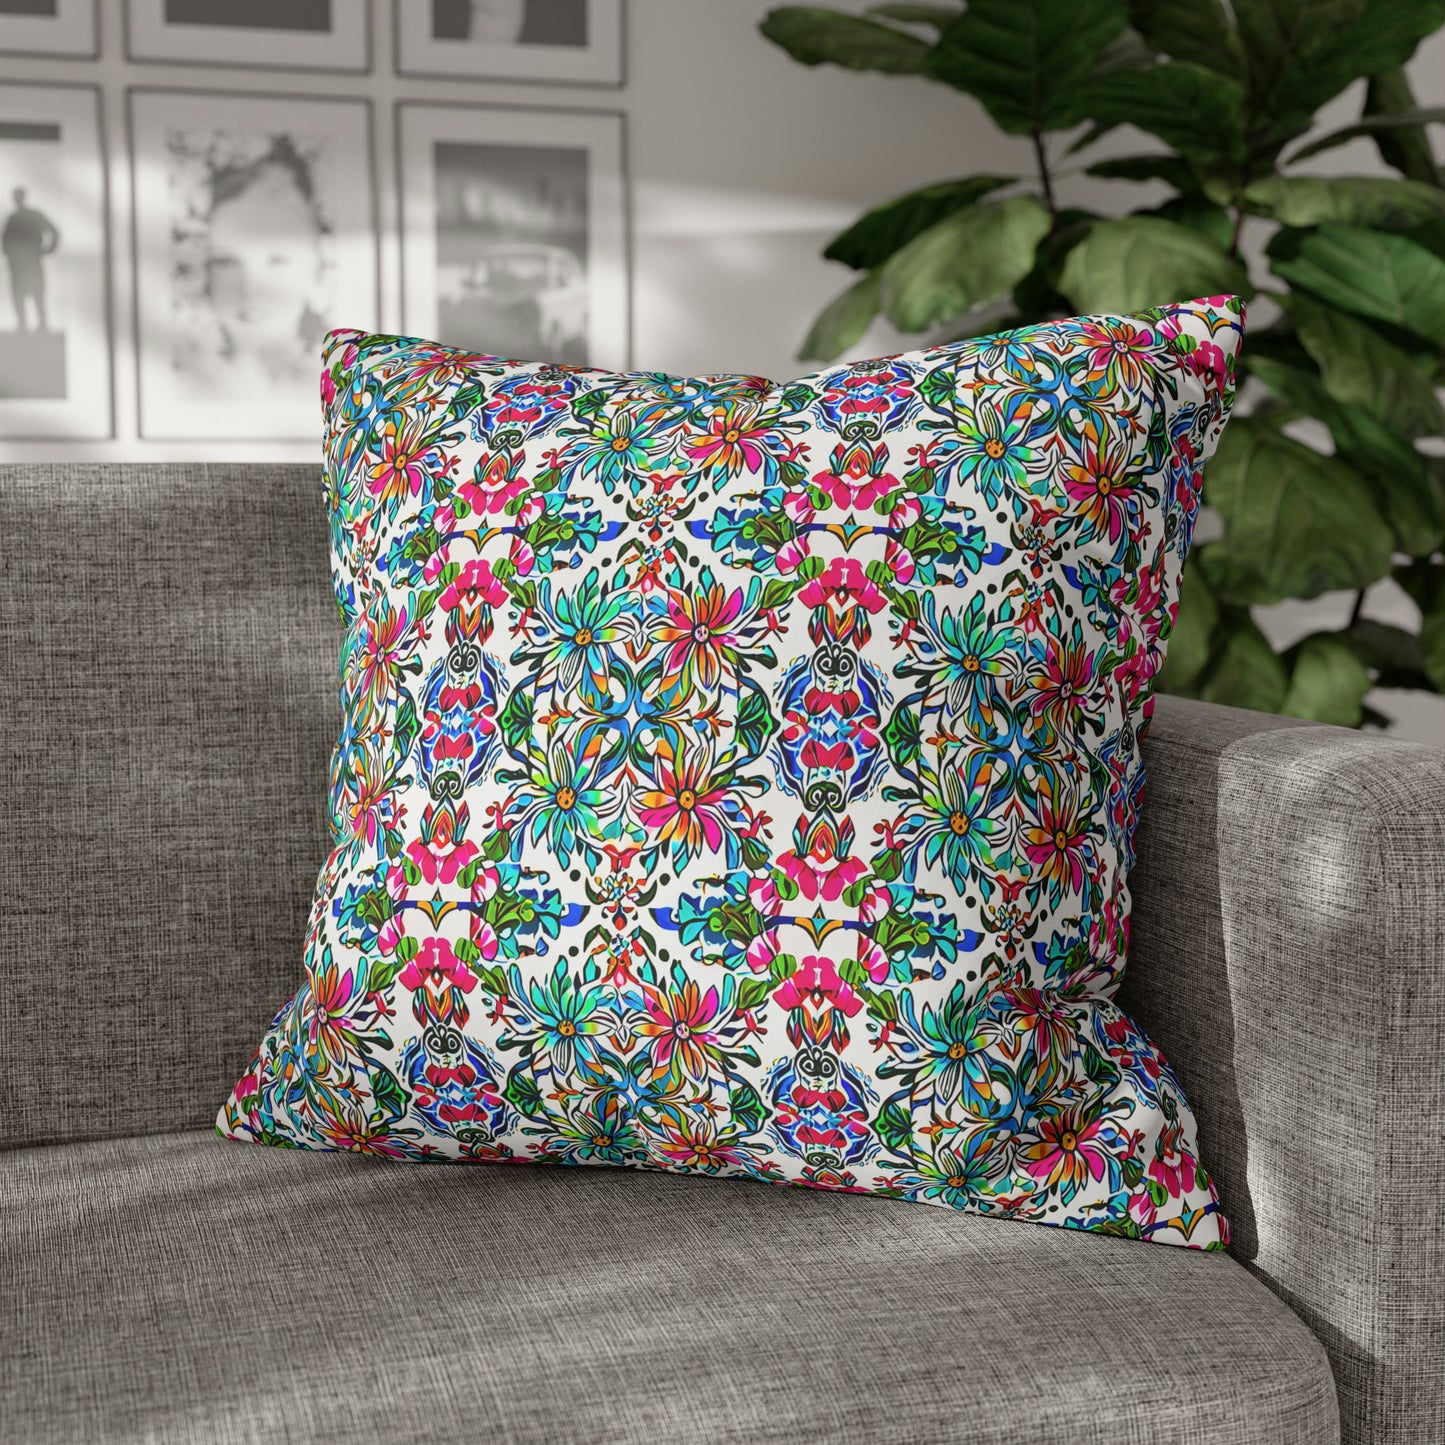 Chelsea Spring Flowers Decorative Spun Polyester Pillow Cover